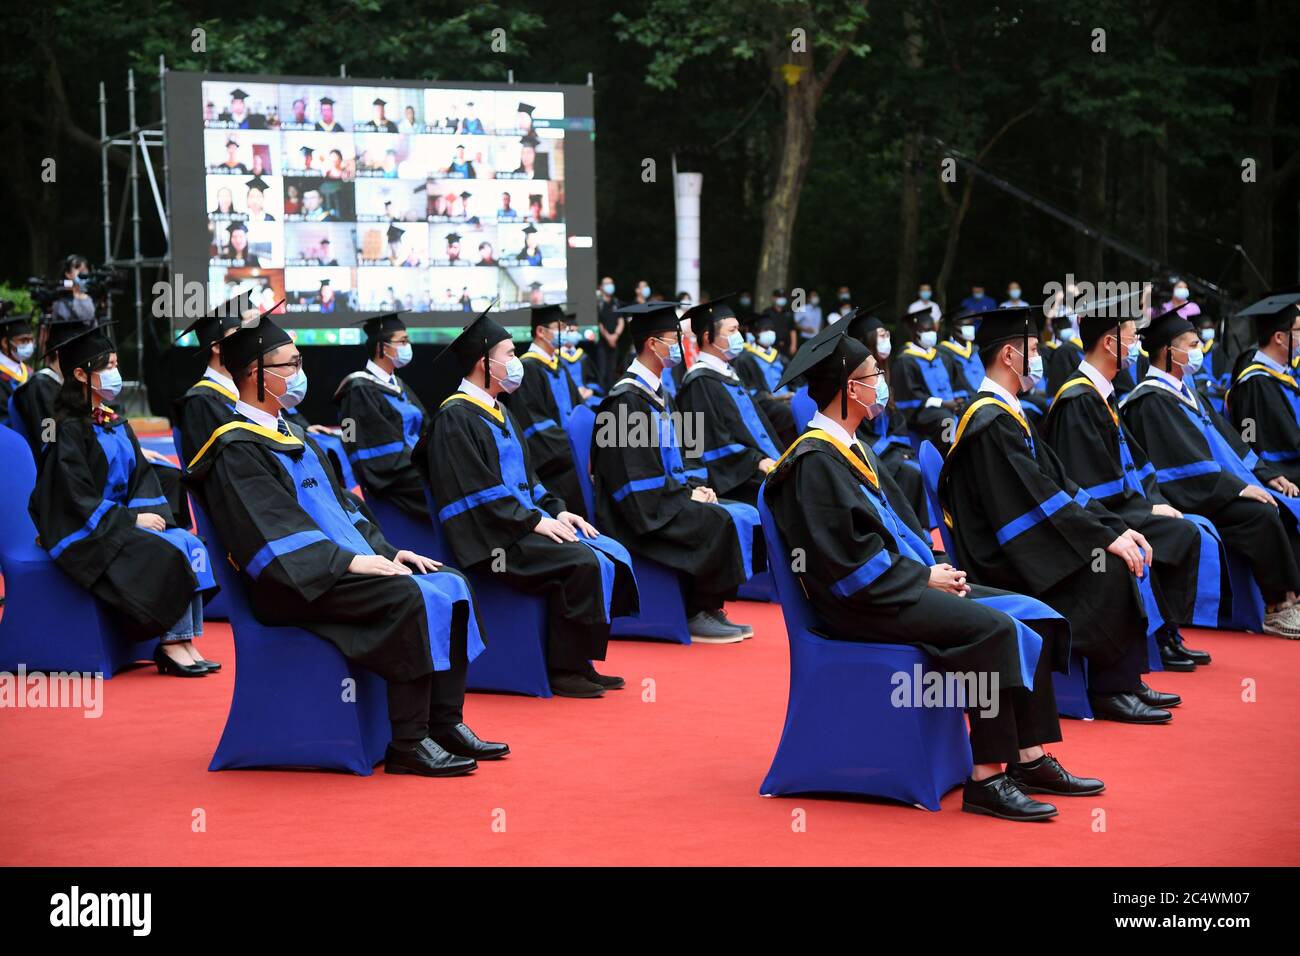 Beijing, China. 29th June, 2020. Graduates attend the commencement ceremony at Beihang University in Beijing, capital of China, June 29, 2020. Beihang University held a commencement ceremony for the Class of 2020 (Bachelor's Degrees) on Monday. In order to reduce the risk of infection of COVID-19, only a minority of graduates attended the ceremony on site with the others attending online. Credit: Ren Chao/Xinhua/Alamy Live News Stock Photo